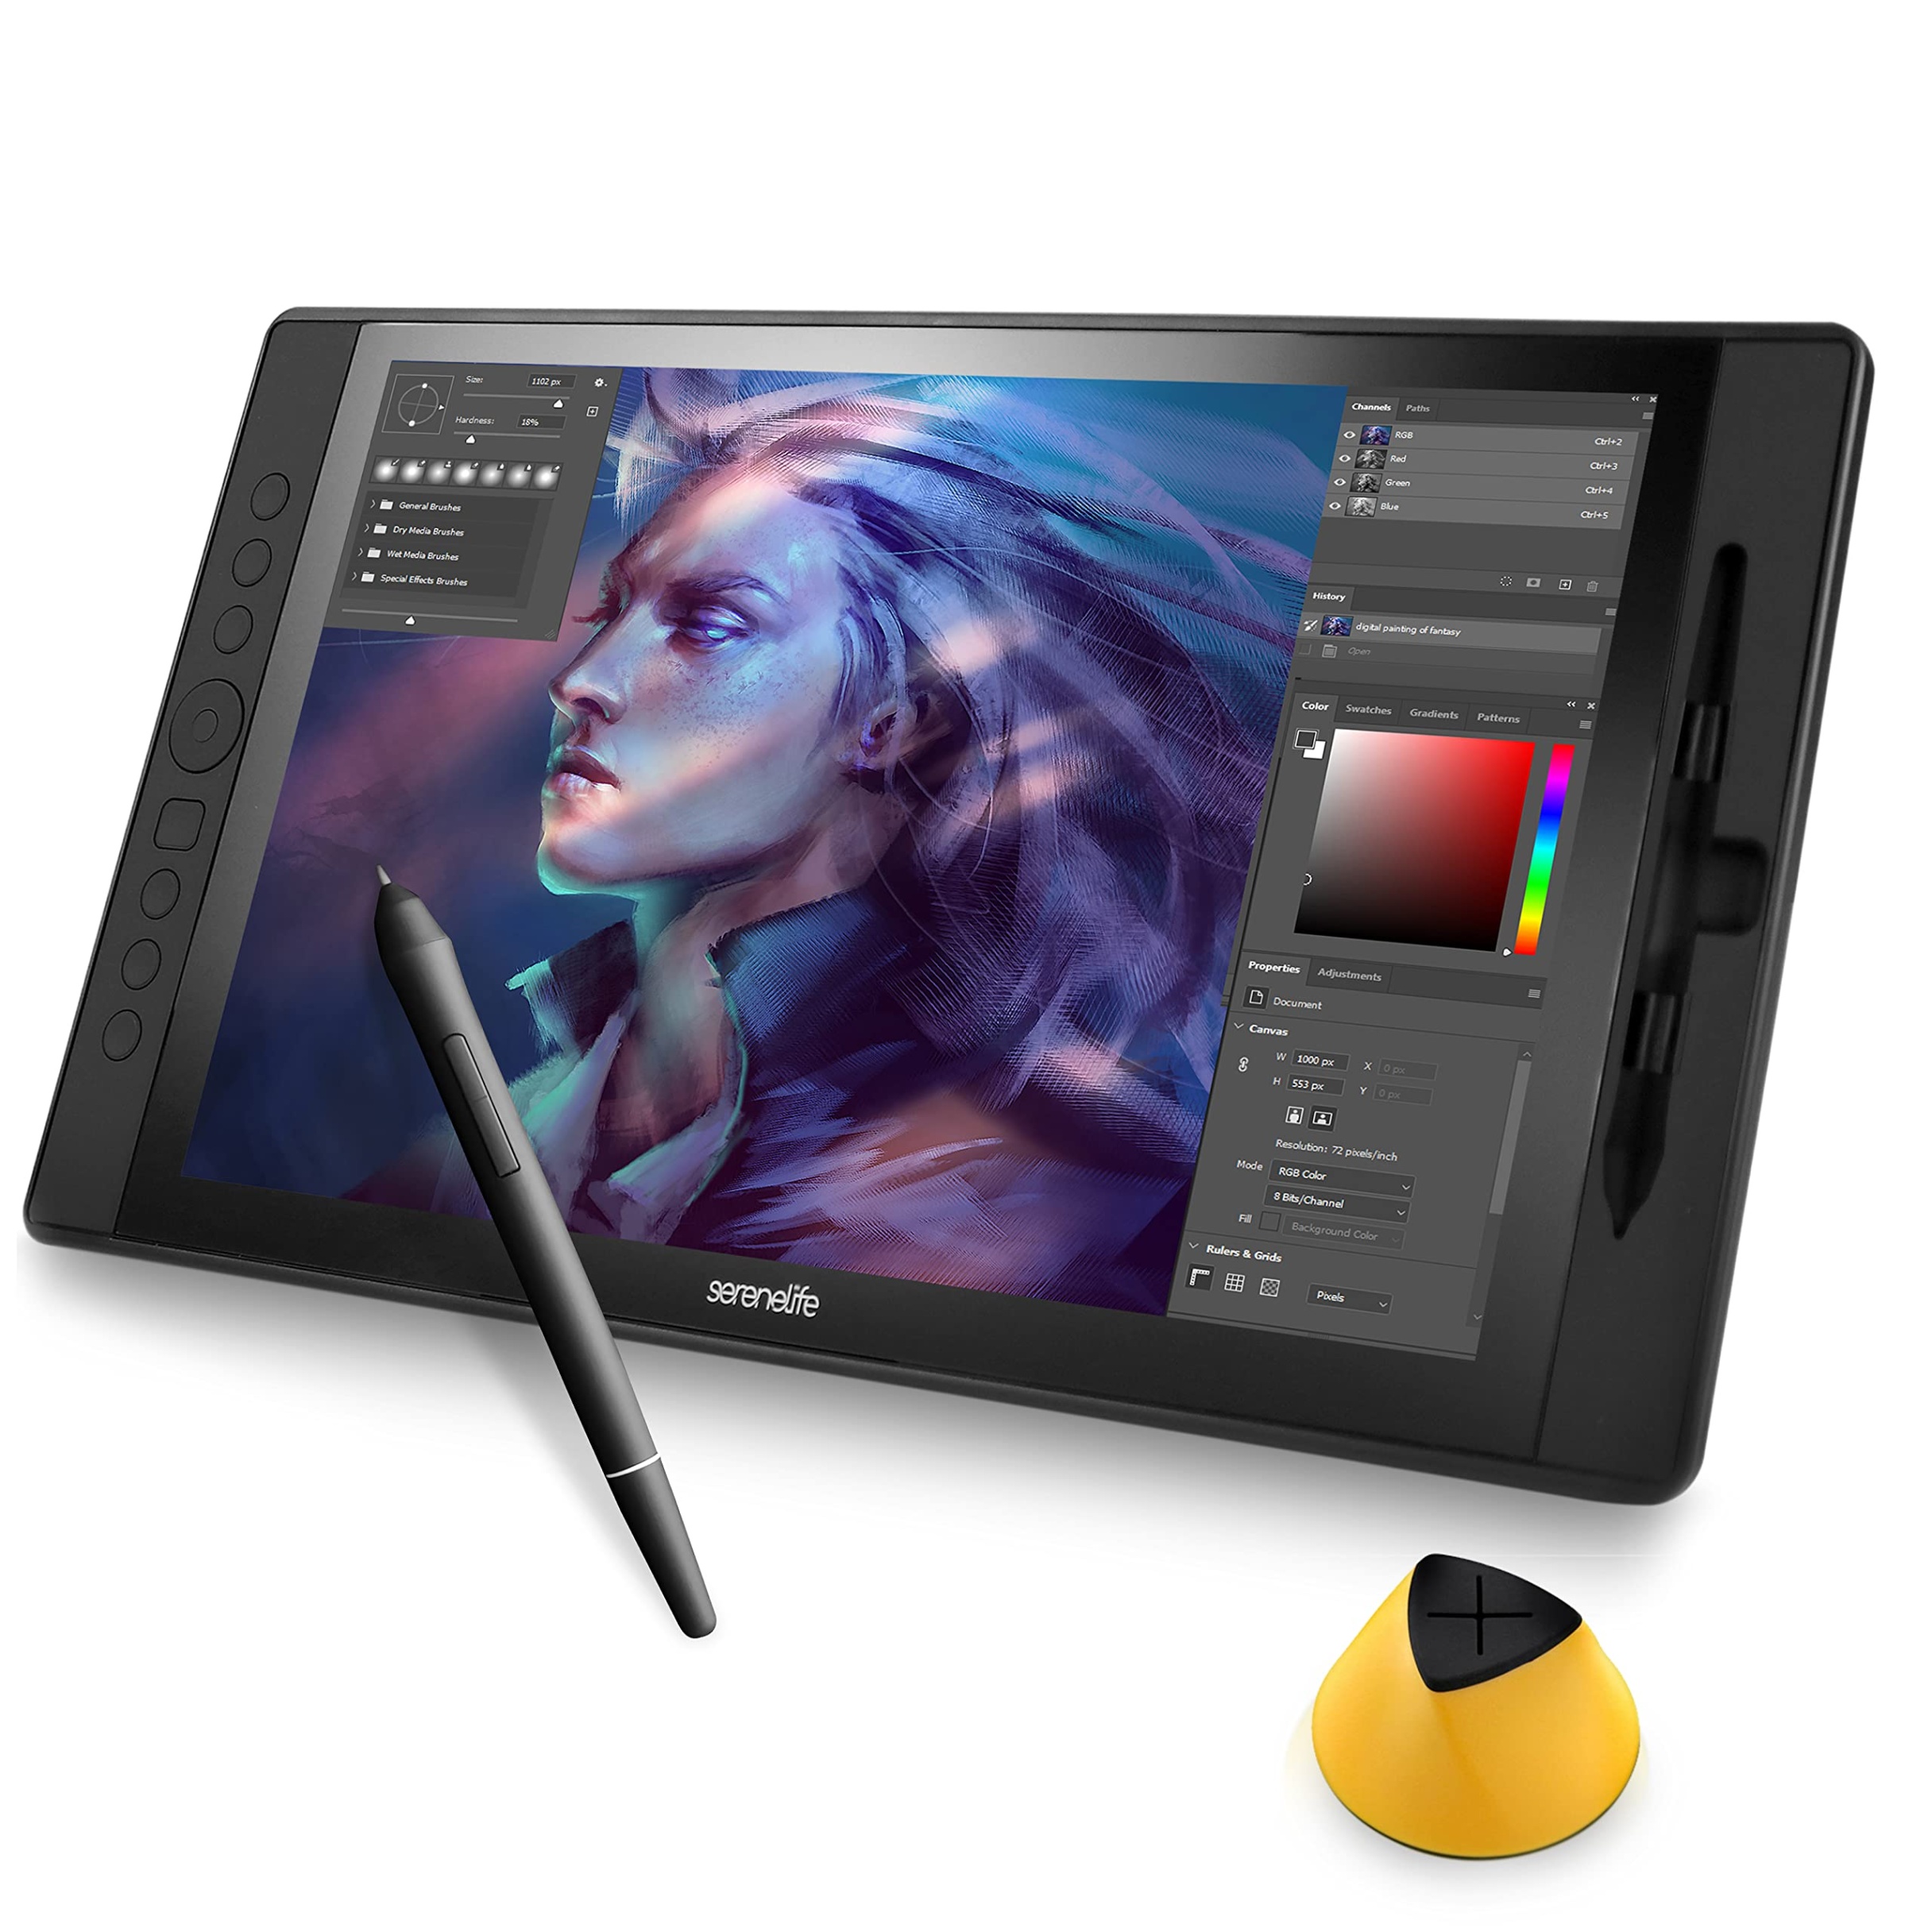 graphic design tablet Niche Utama Home SereneLife Graphic Tablet with Passive Pen -